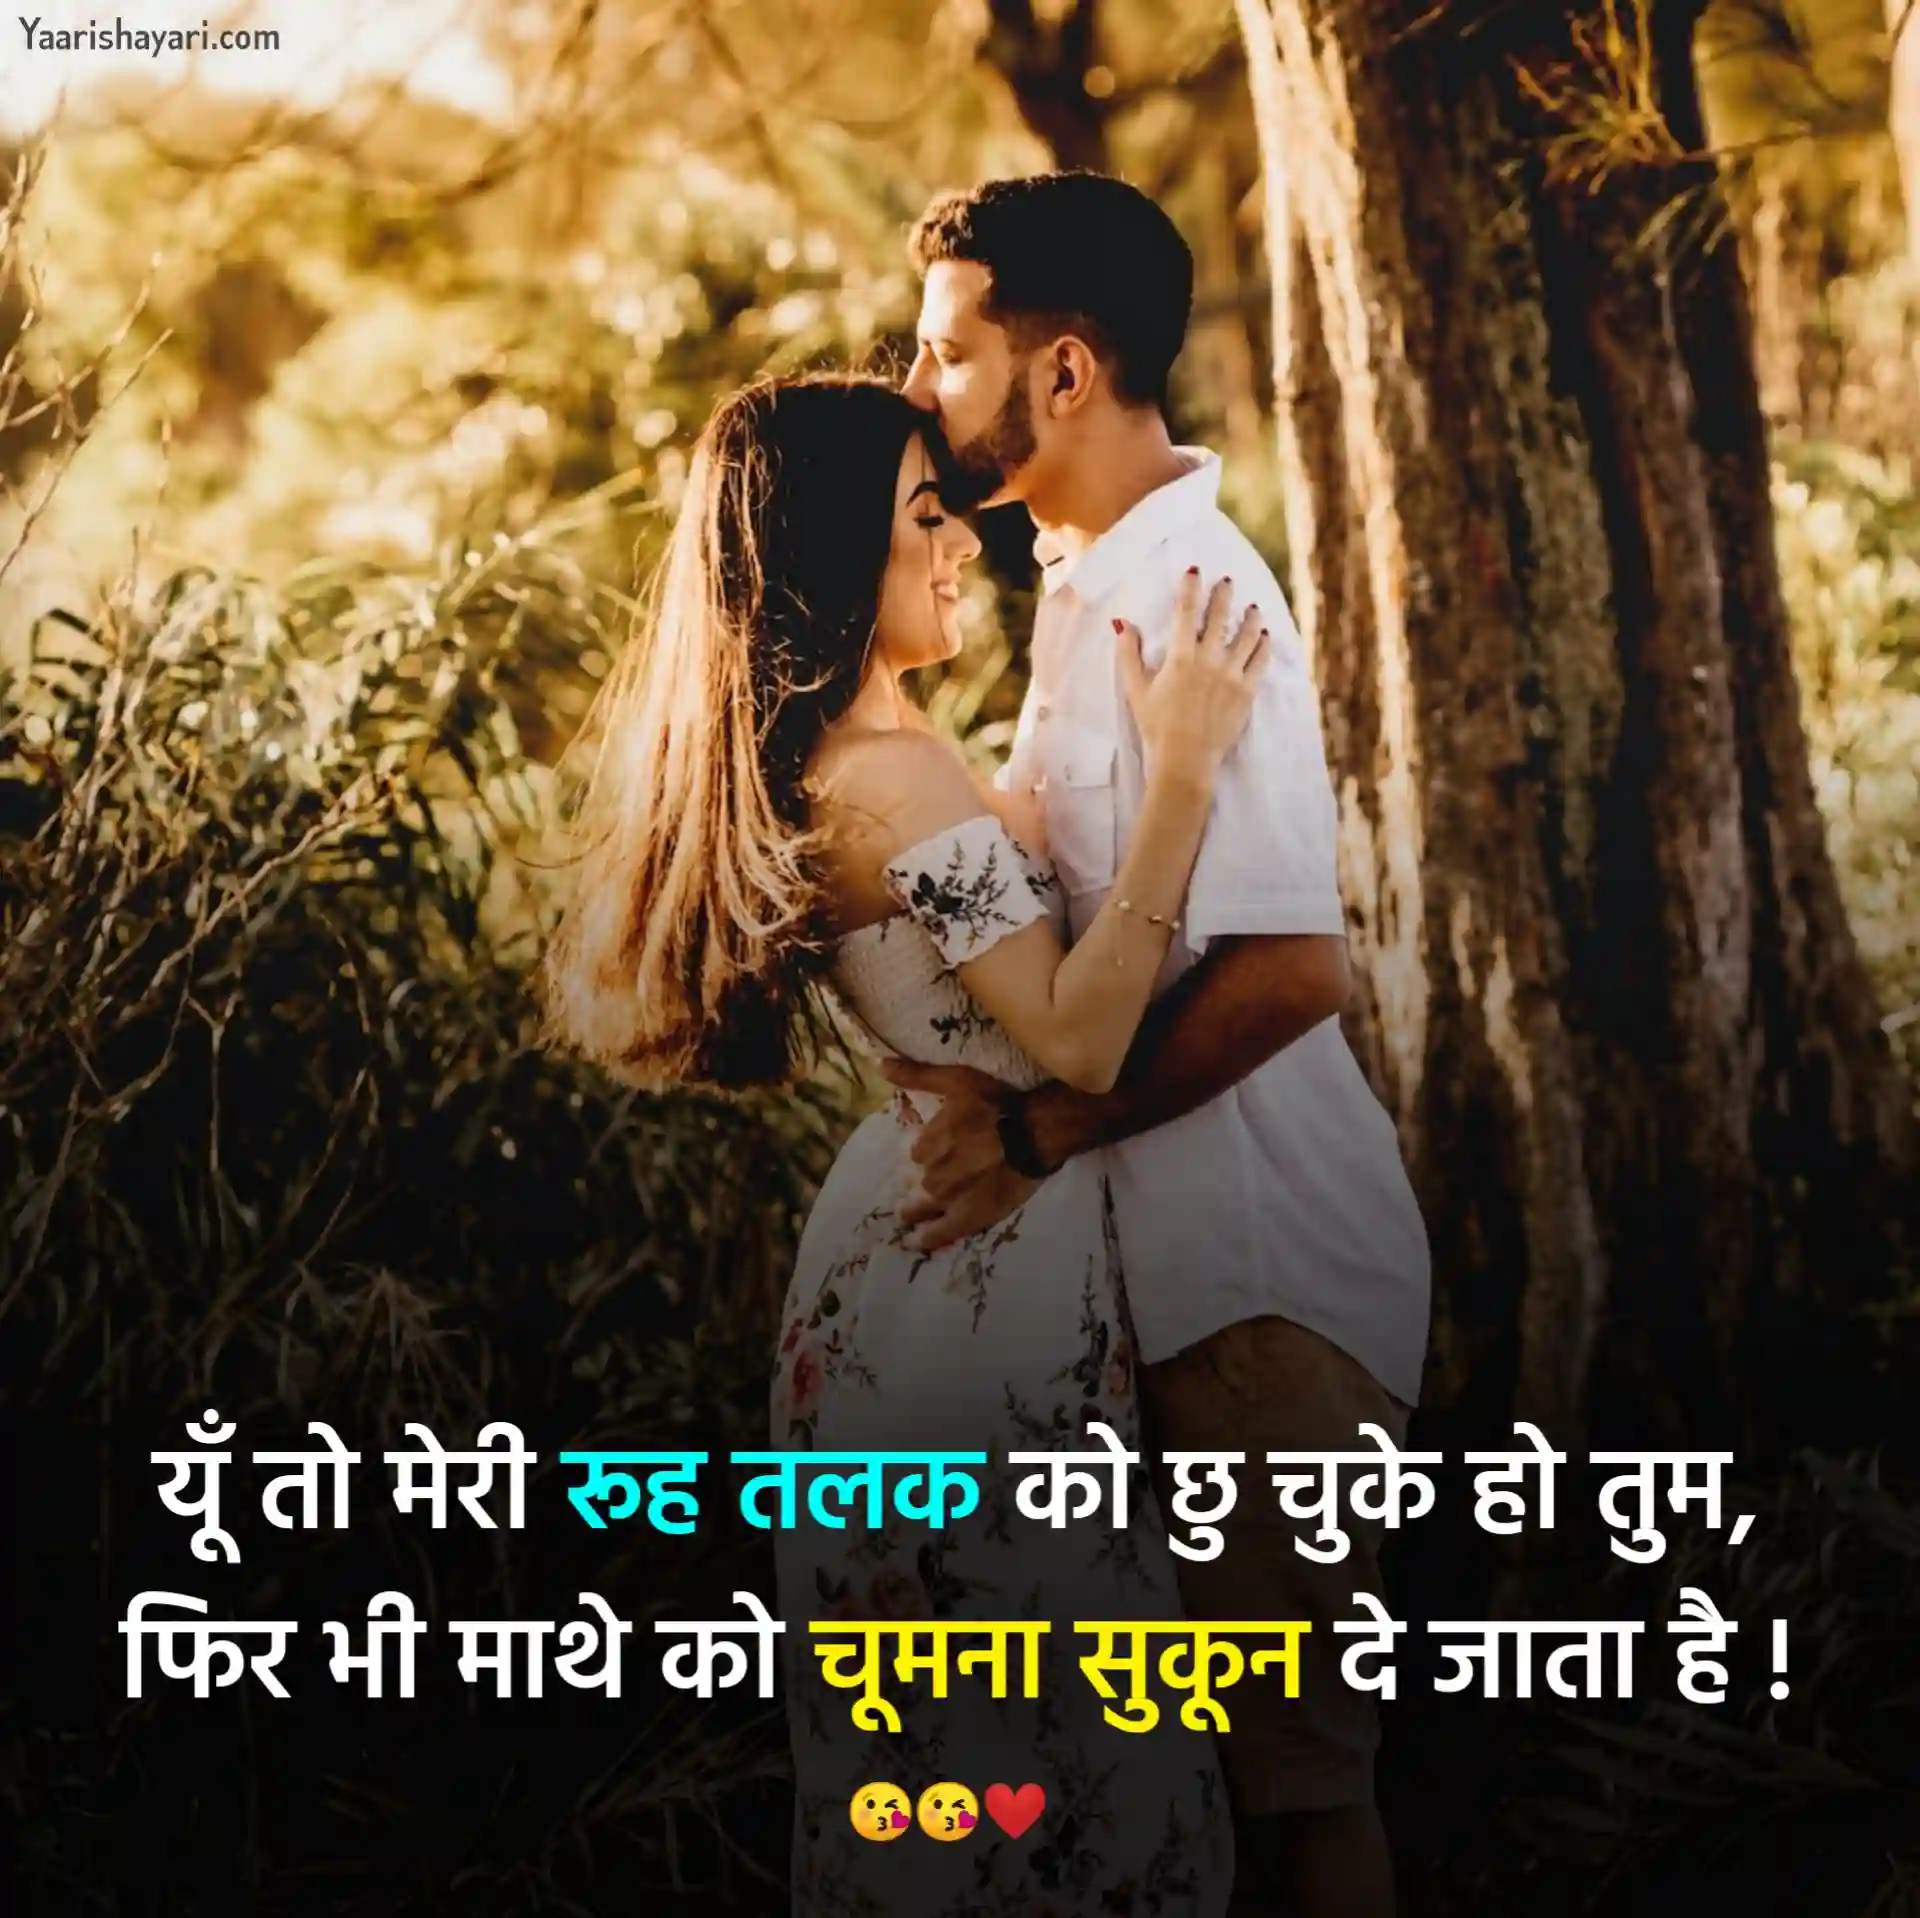 Quotes on Love in Hindi Image